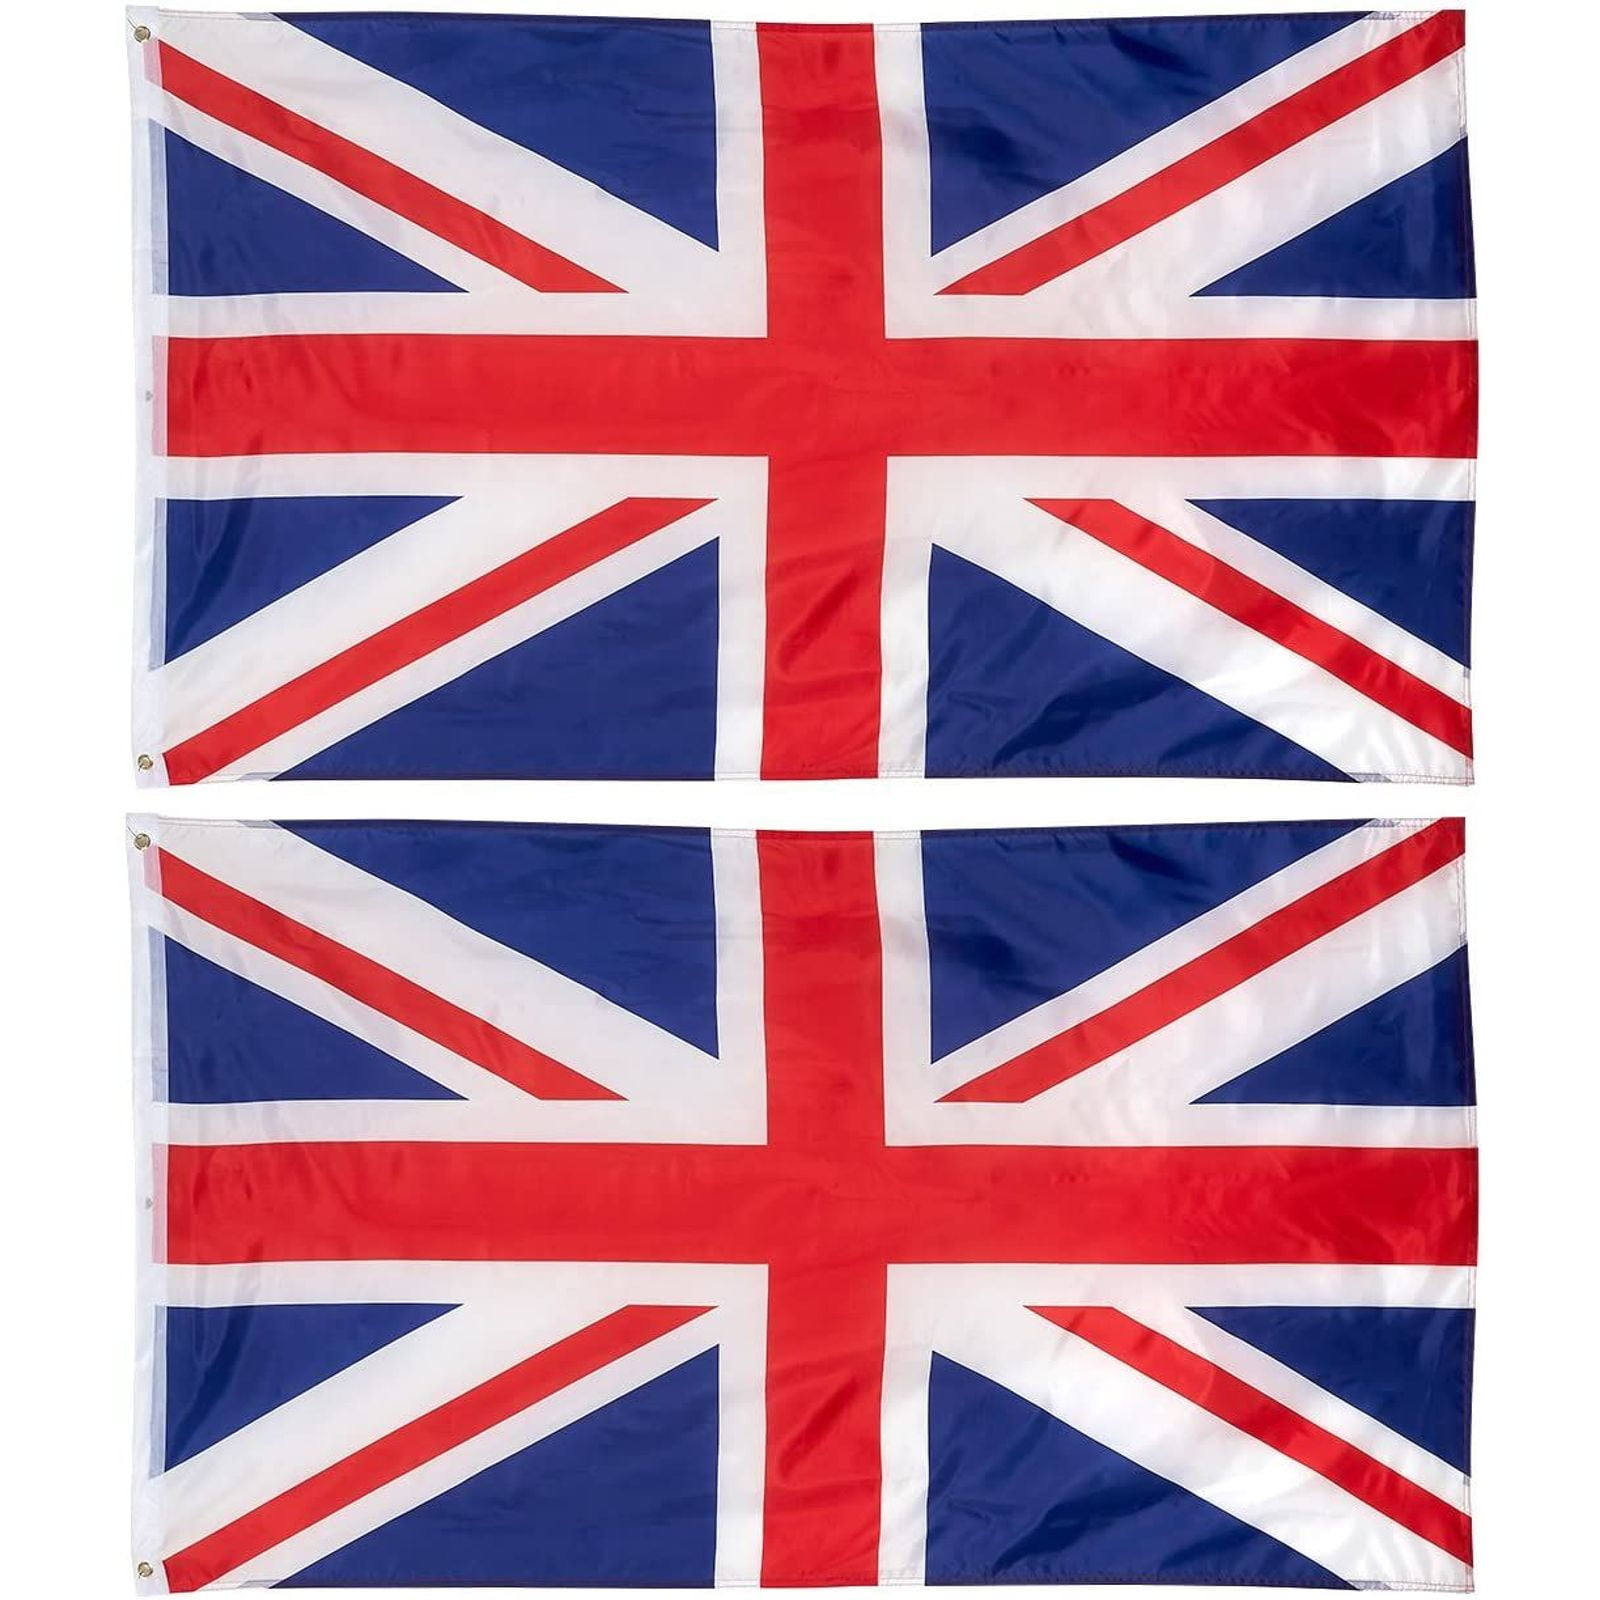 GREAT BRITAIN UK MINI POLYESTER INTERNATIONAL FLAG BANNER 3 X 5 INCHES 